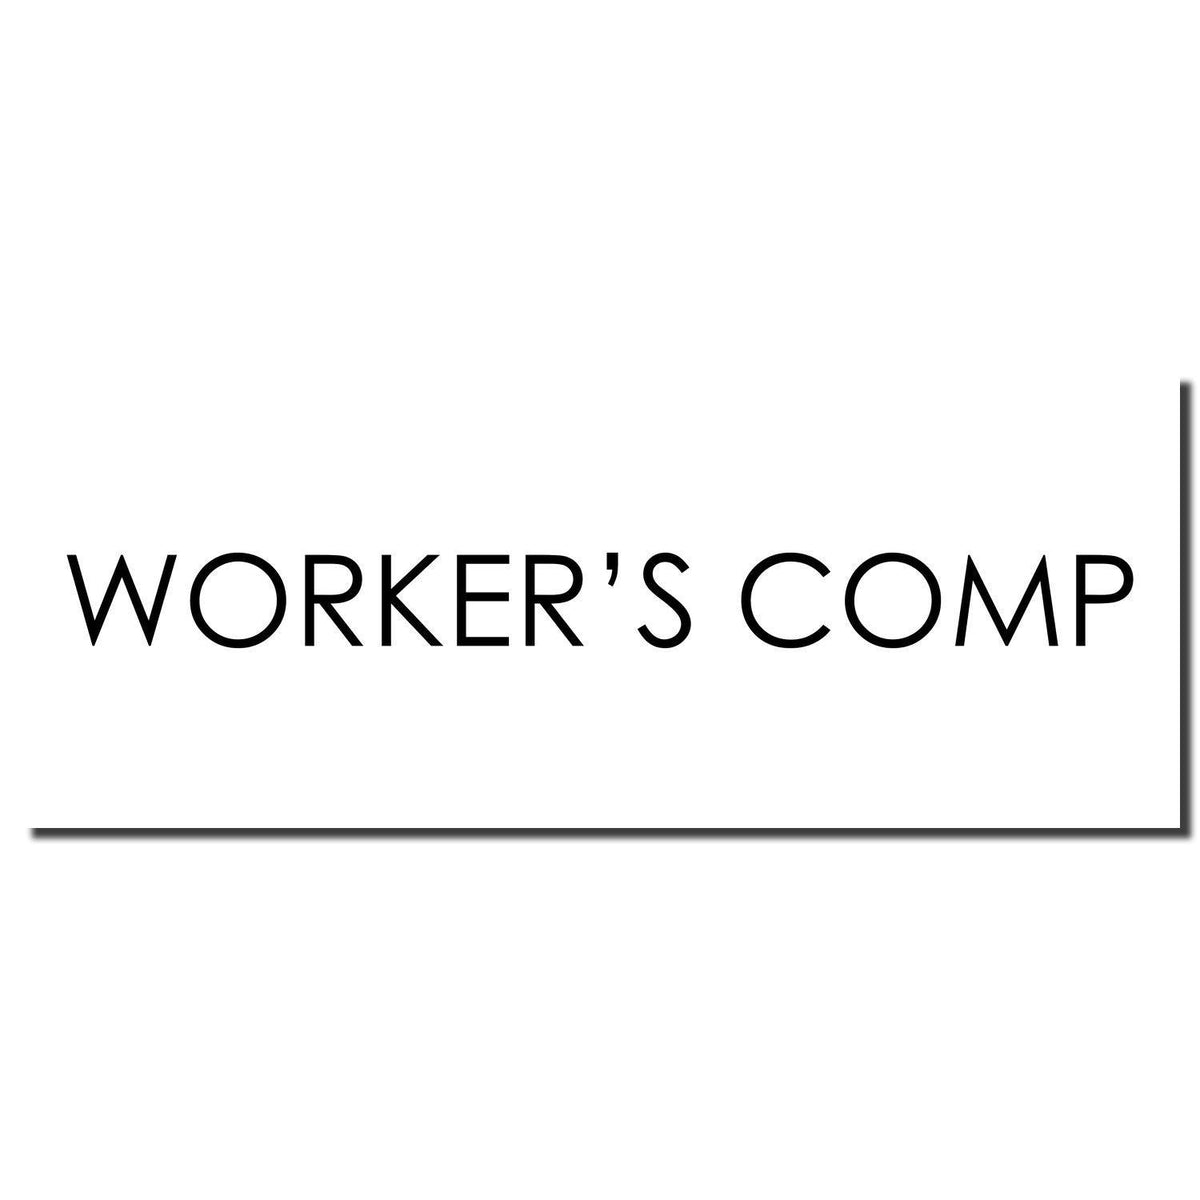 Enlarged Imprint Workers Comp Rubber Stamp Sample